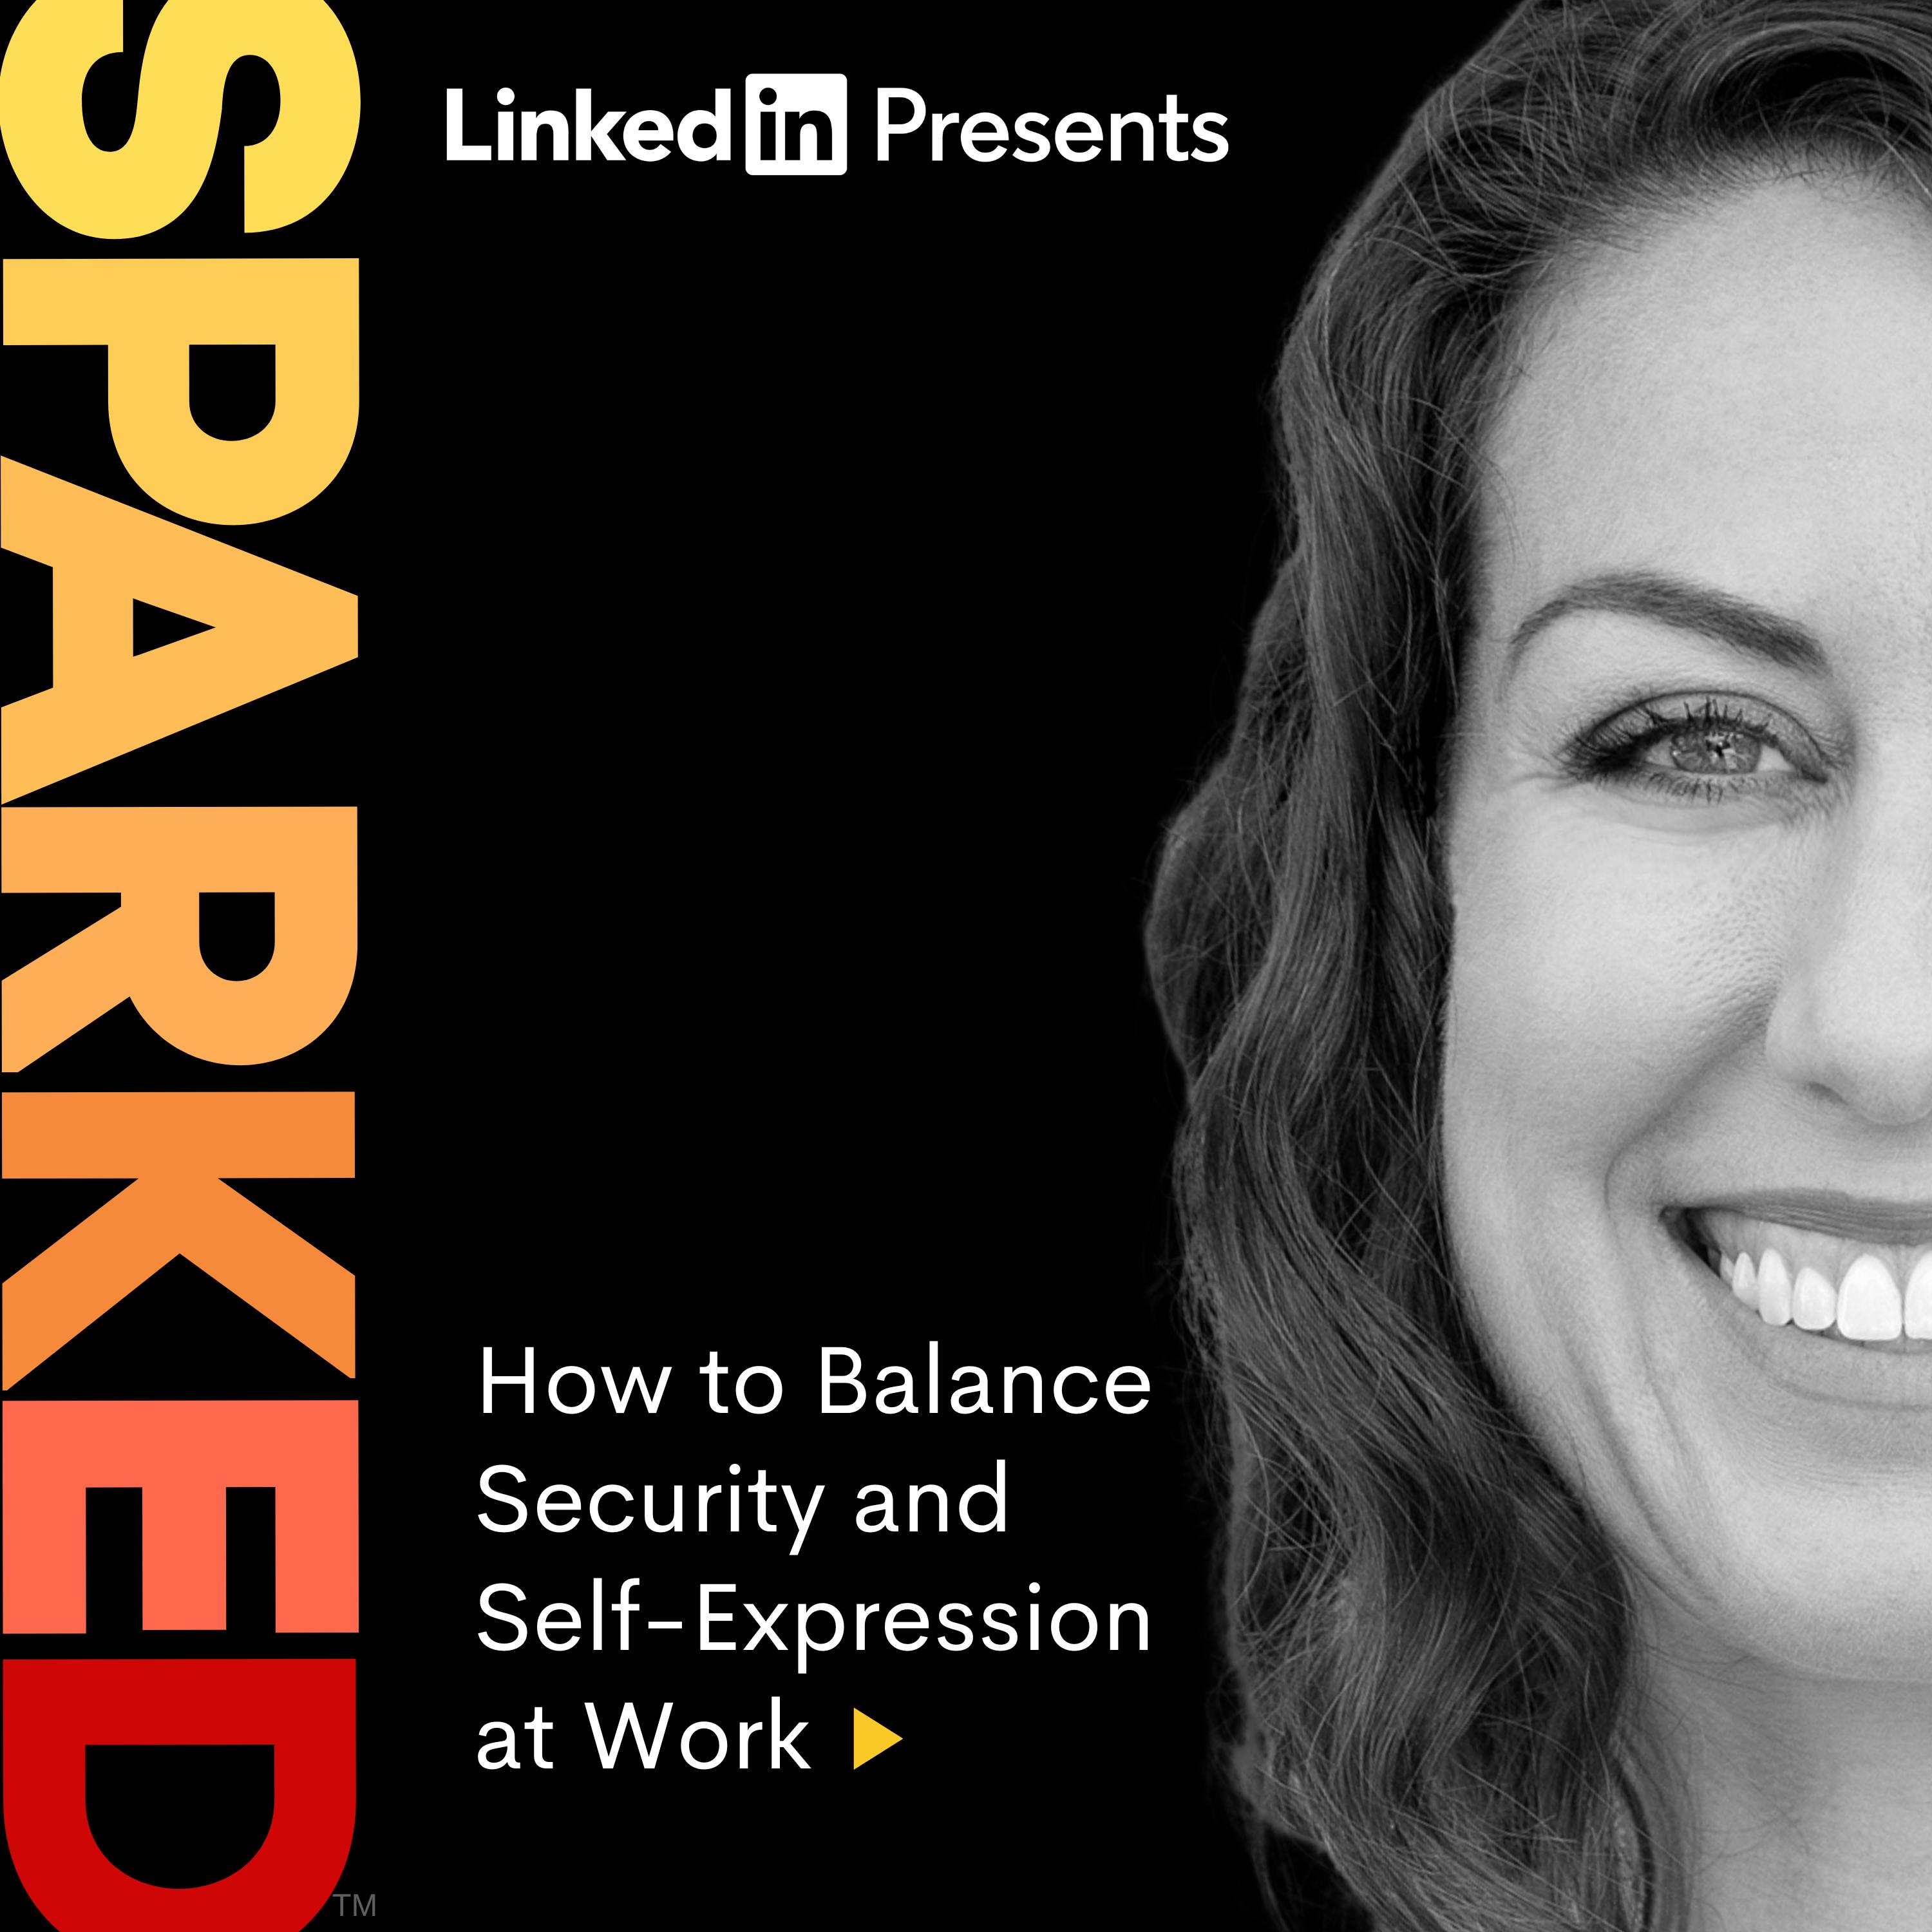 How to Balance Security and Self-Expression at Work